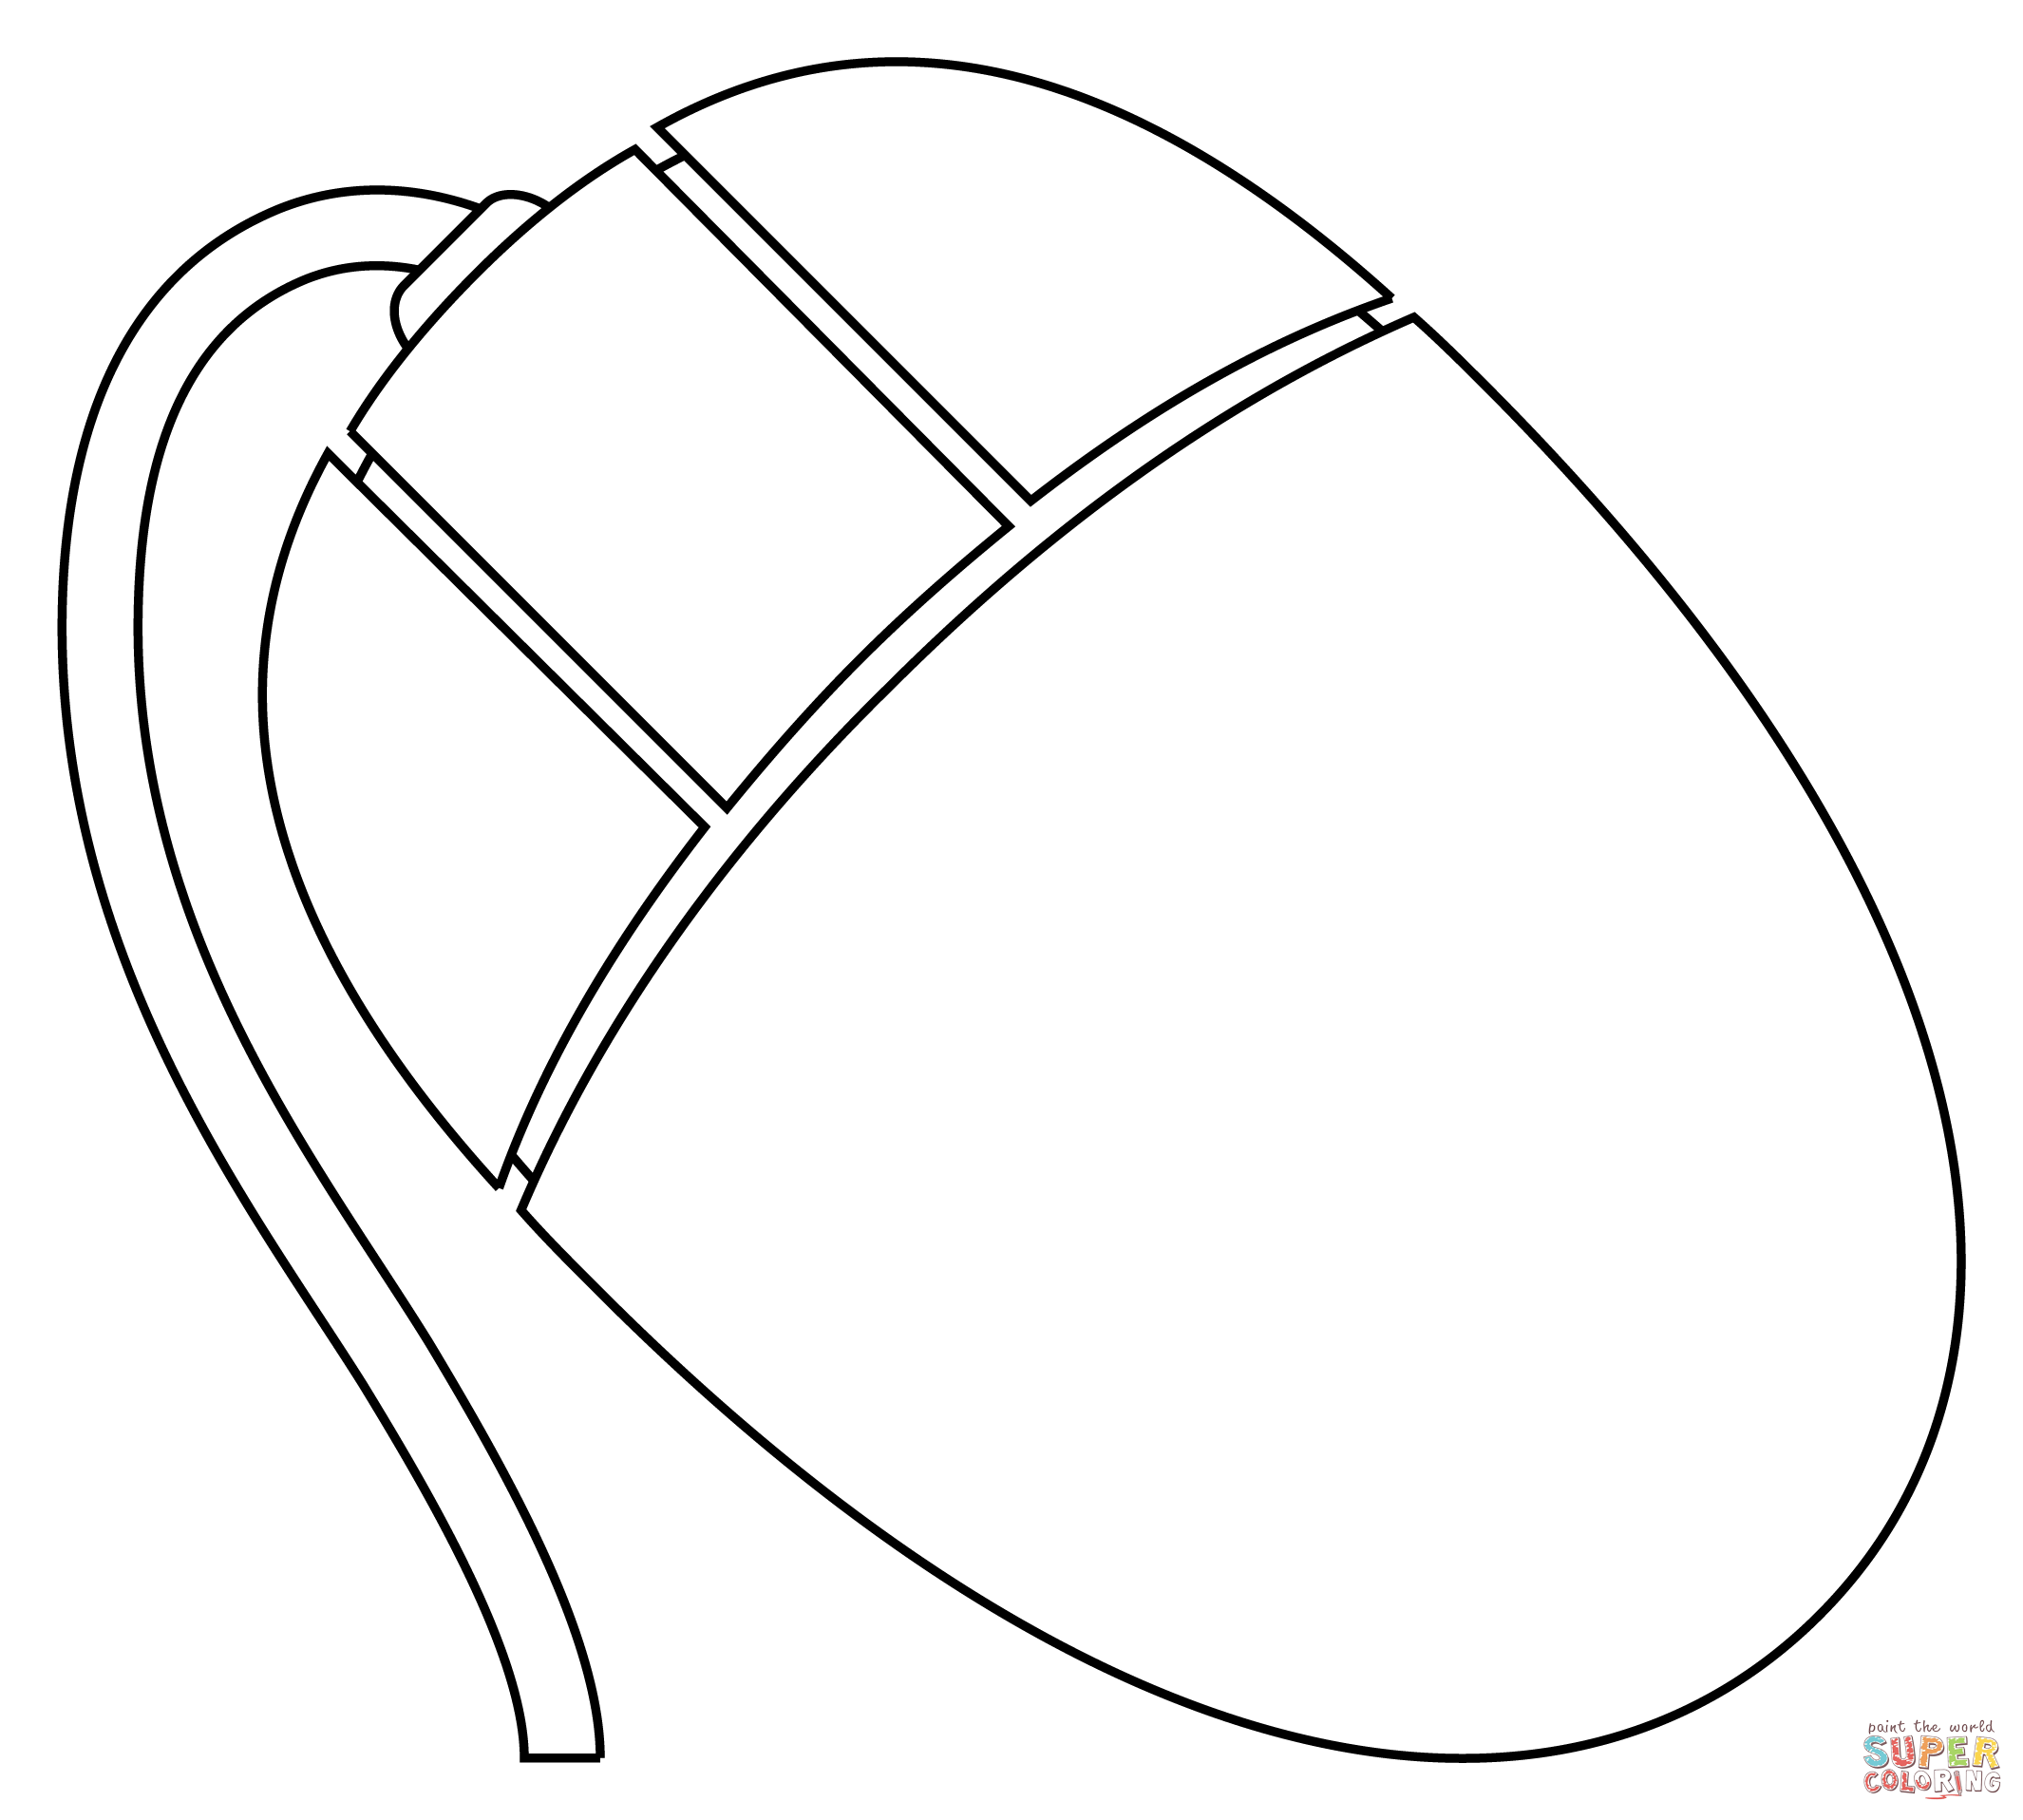 Computer Mouse coloring page | Free Printable Coloring Pages